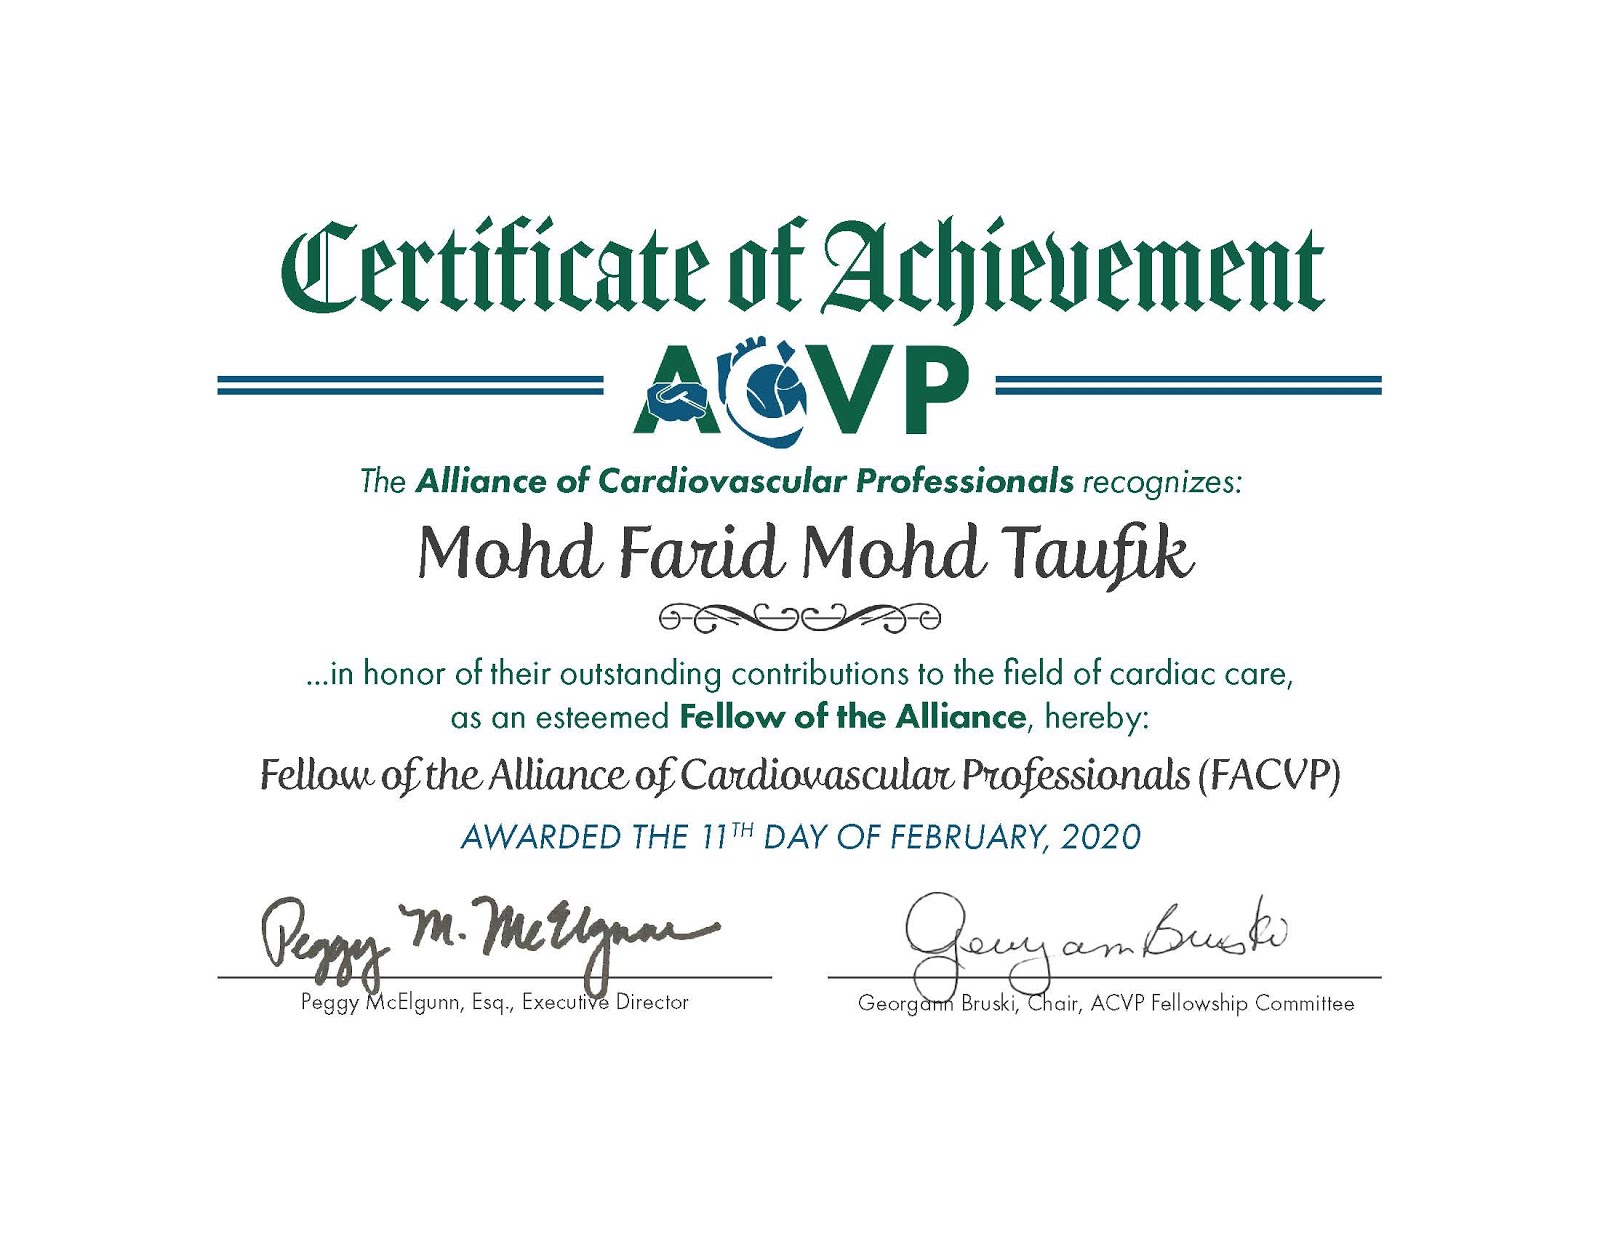 Fellow Of The Alliance Of Cardiovascular Professionals